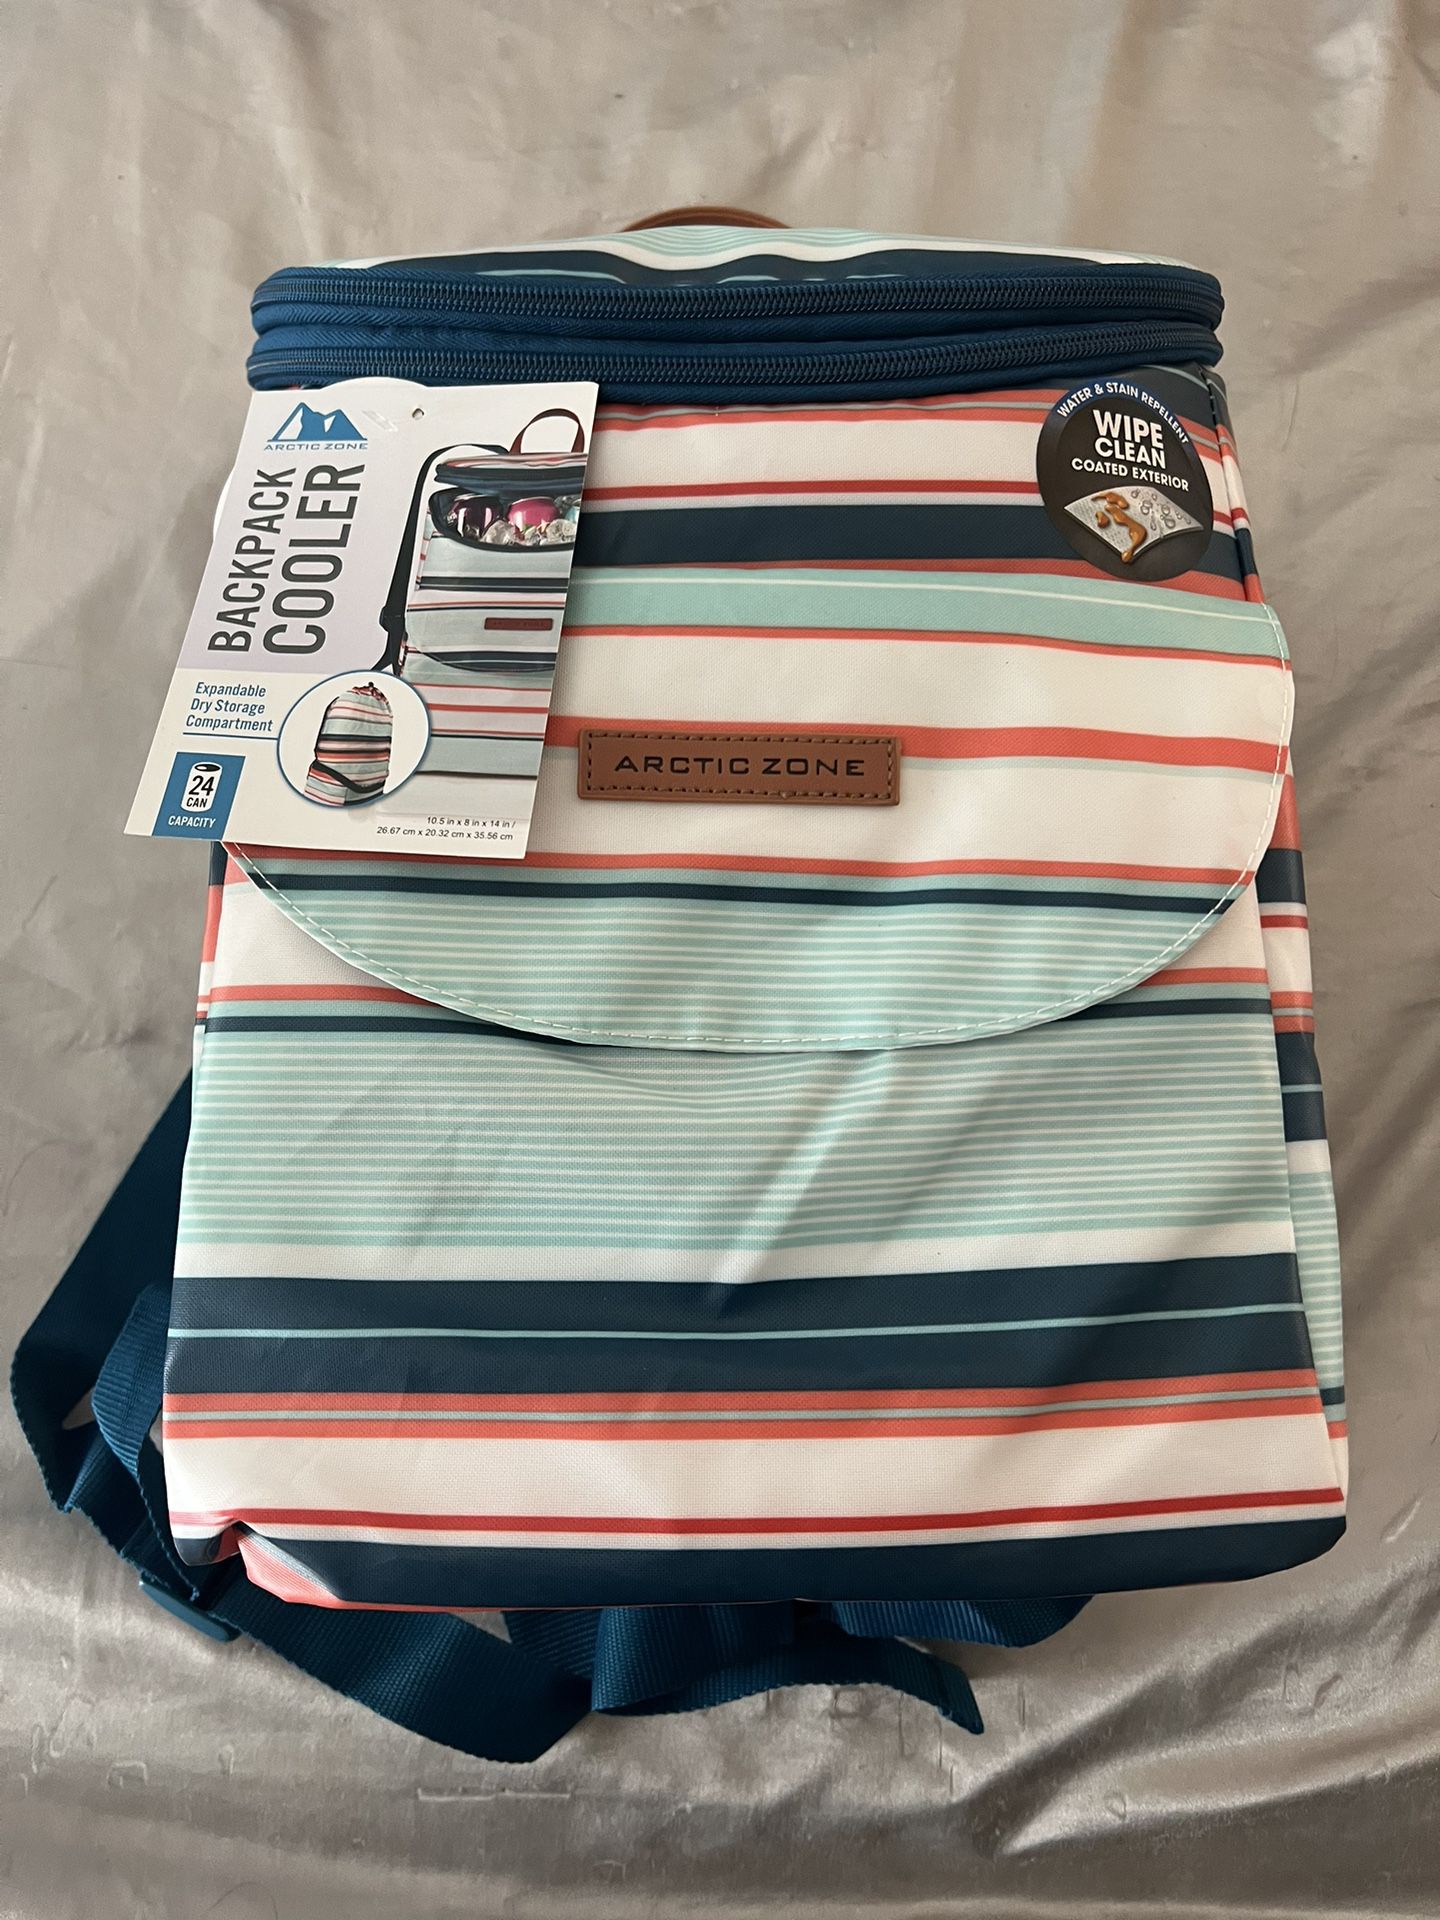 Arctic Zone Backpack Cooler 24 Can for Sale in Queen Creek, AZ - OfferUp